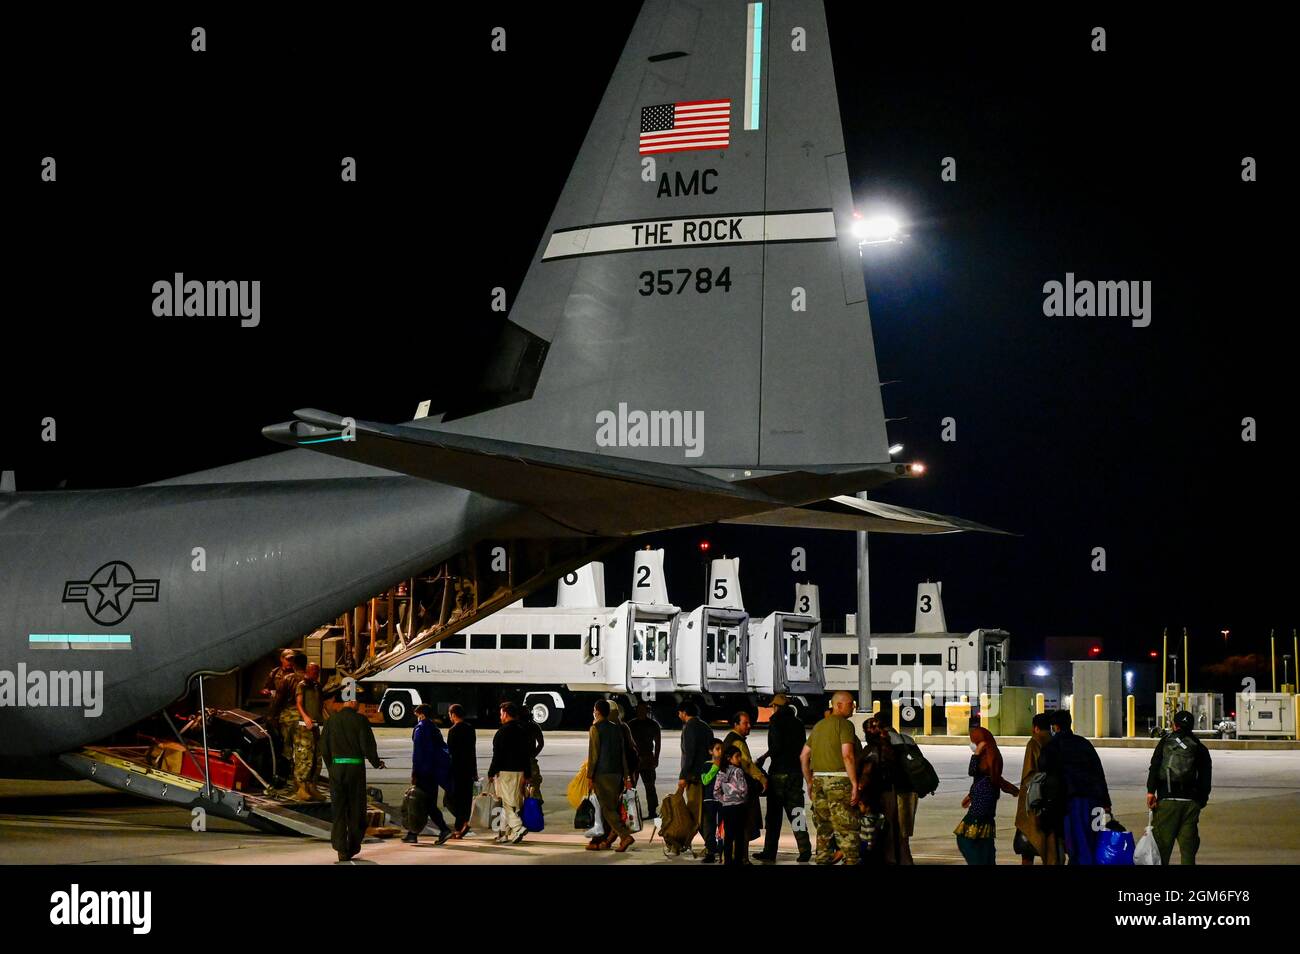 Afghan evacuees board a C-130J Super Hercules assigned to the 19th Airlift Wing at Philadelphia International Airport, Pennsylvania, Aug. 30, 2021, enroute to Fort Bliss, Texas. The Department of Defense, through U.S. Northern Command, and in support of the Department of Homeland Security, is providing transportation, temporary housing, medical screening, and general support for at least 50,000 Afghan evacuees at suitable facilities, in permanent or temporary structures, as quickly as possible. This initiative provides Afghan personnel essential support at secure locations outside Afghanistan. Stock Photo